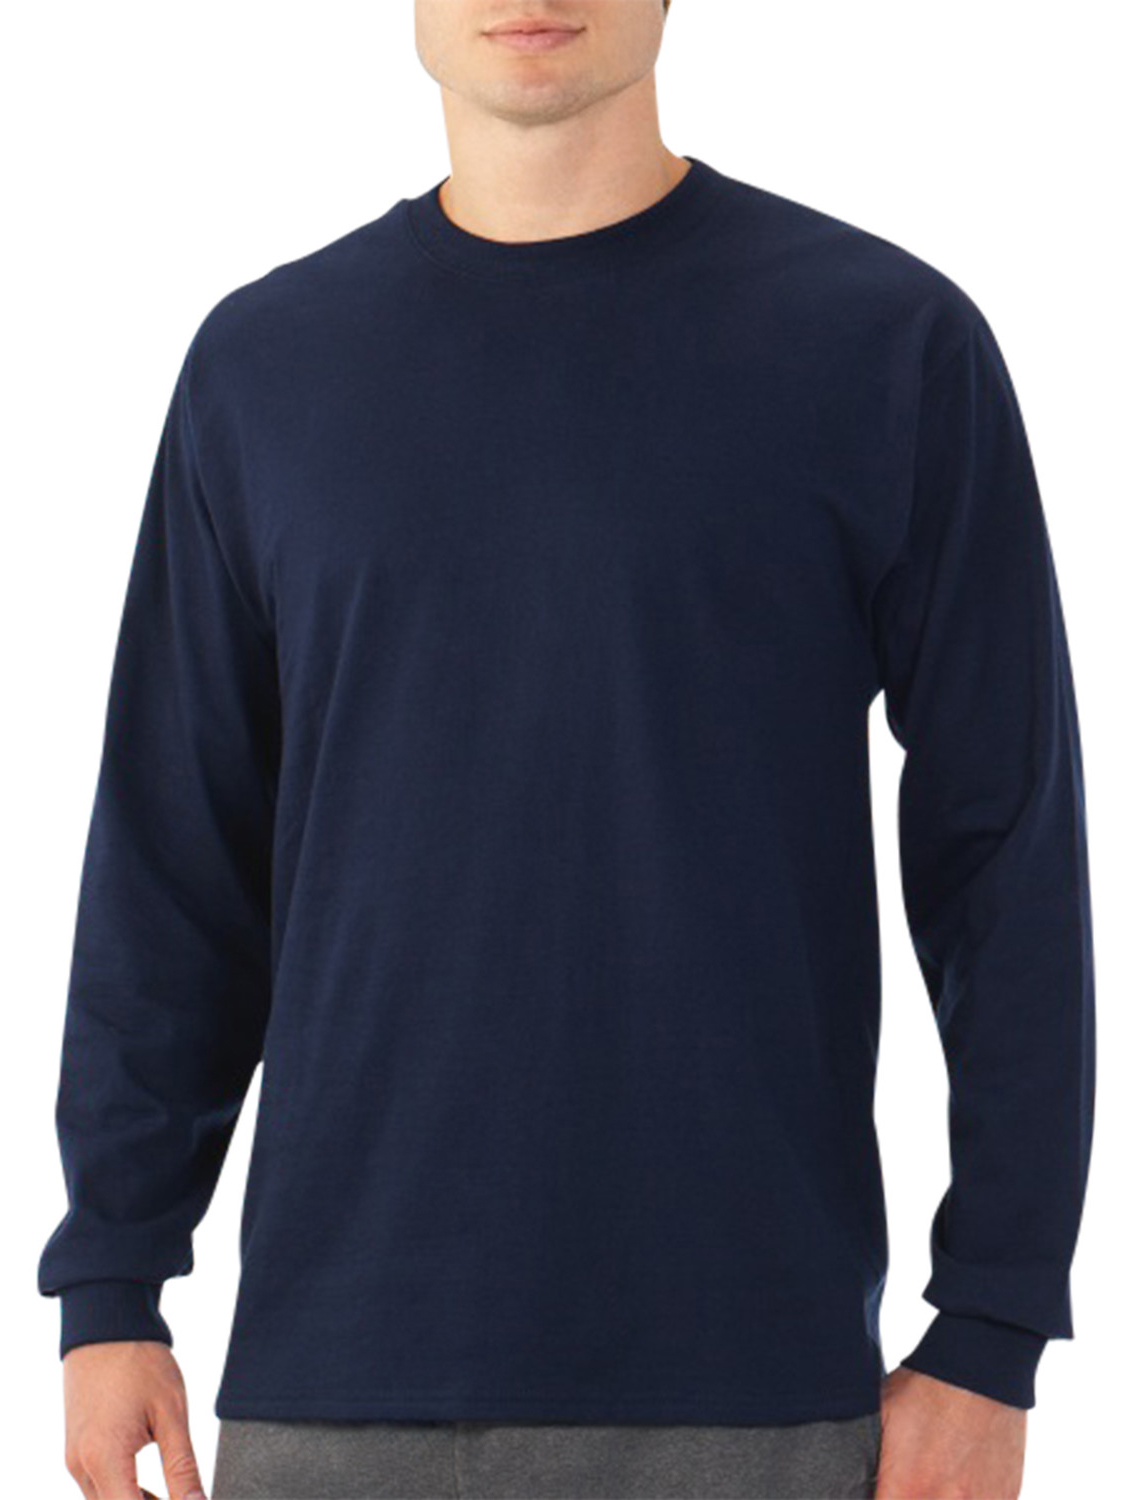 Fruit of the Loom Men's Platinum EverSoft Long Sleeve T-Shirt, Available up to size 4X - image 1 of 6